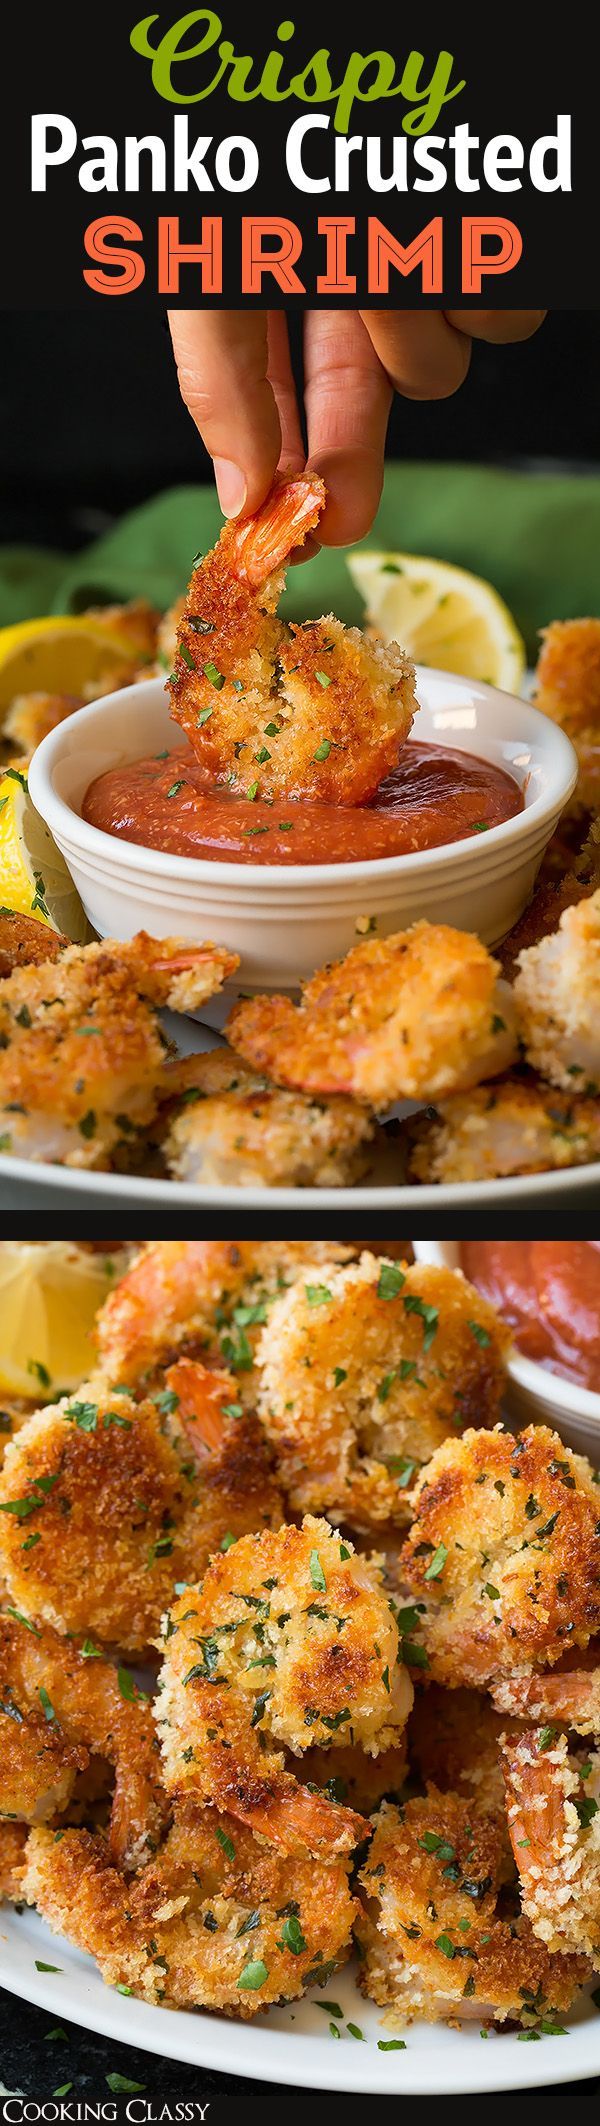 Crispy Panko Shrimp with Cocktail Sauce from @cookingclassy  | This easy shrimp recipe is perfect for a dinner party appetizer.